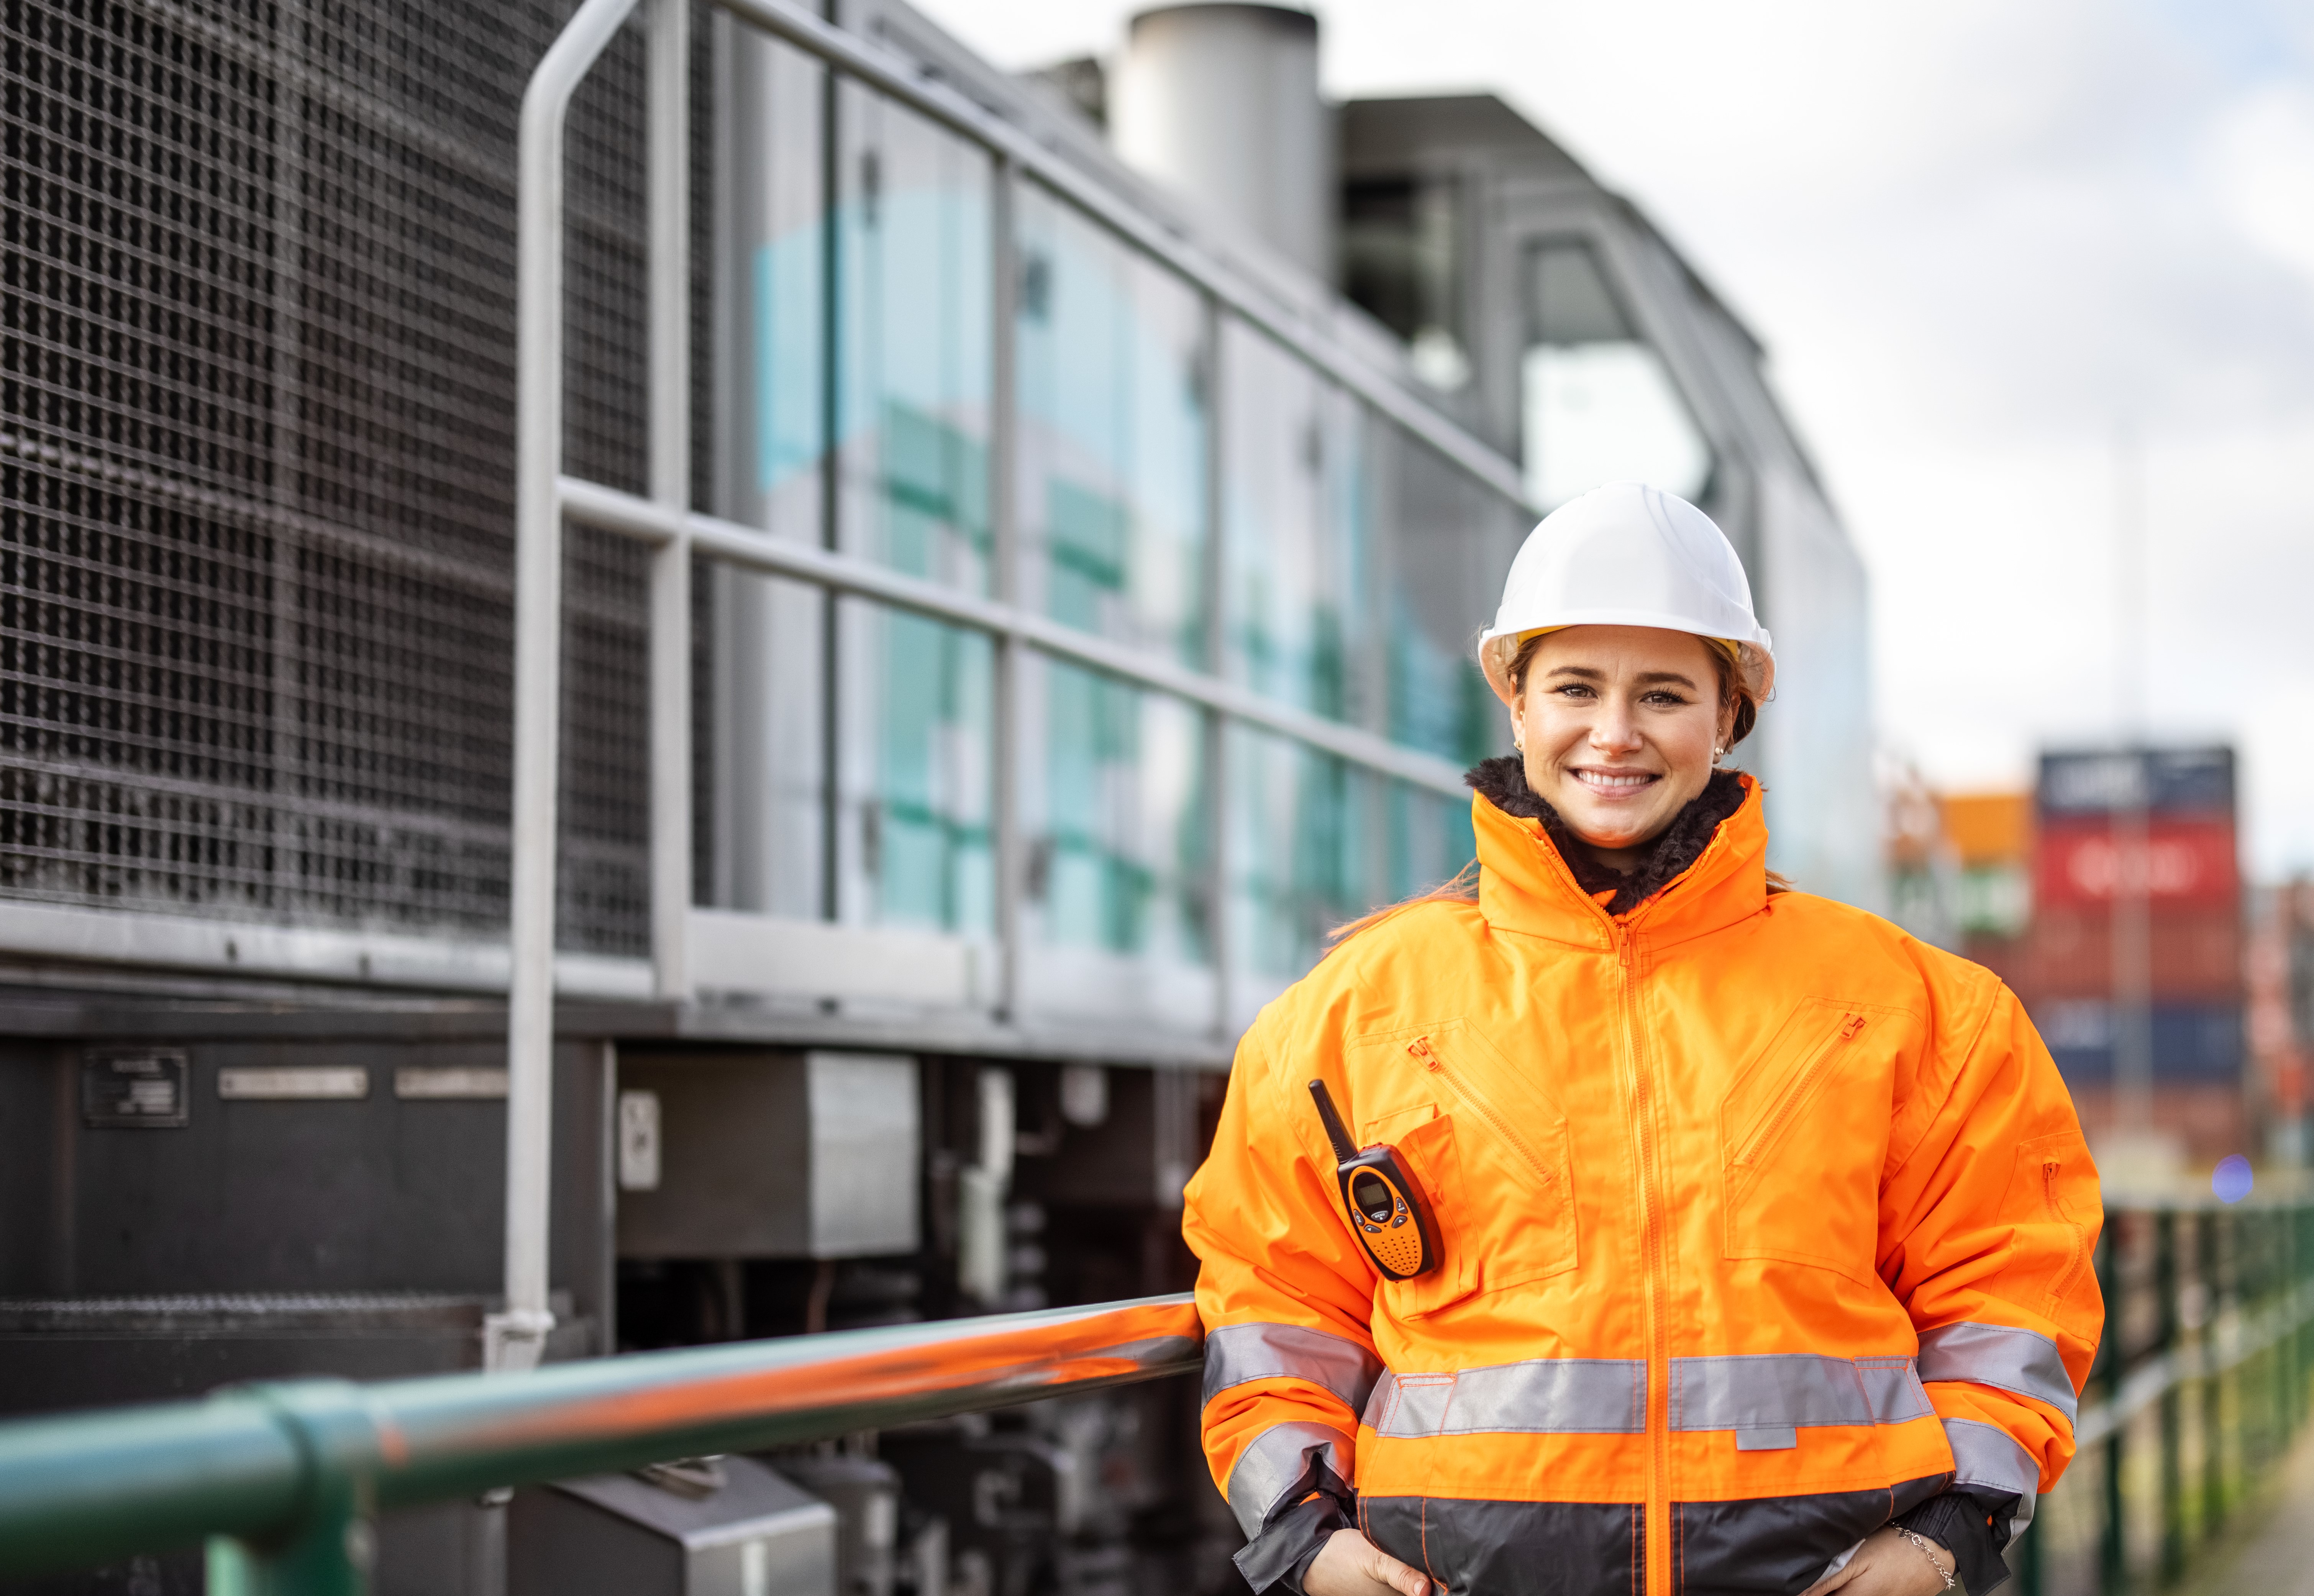 Female rail worker standing in front of freight train